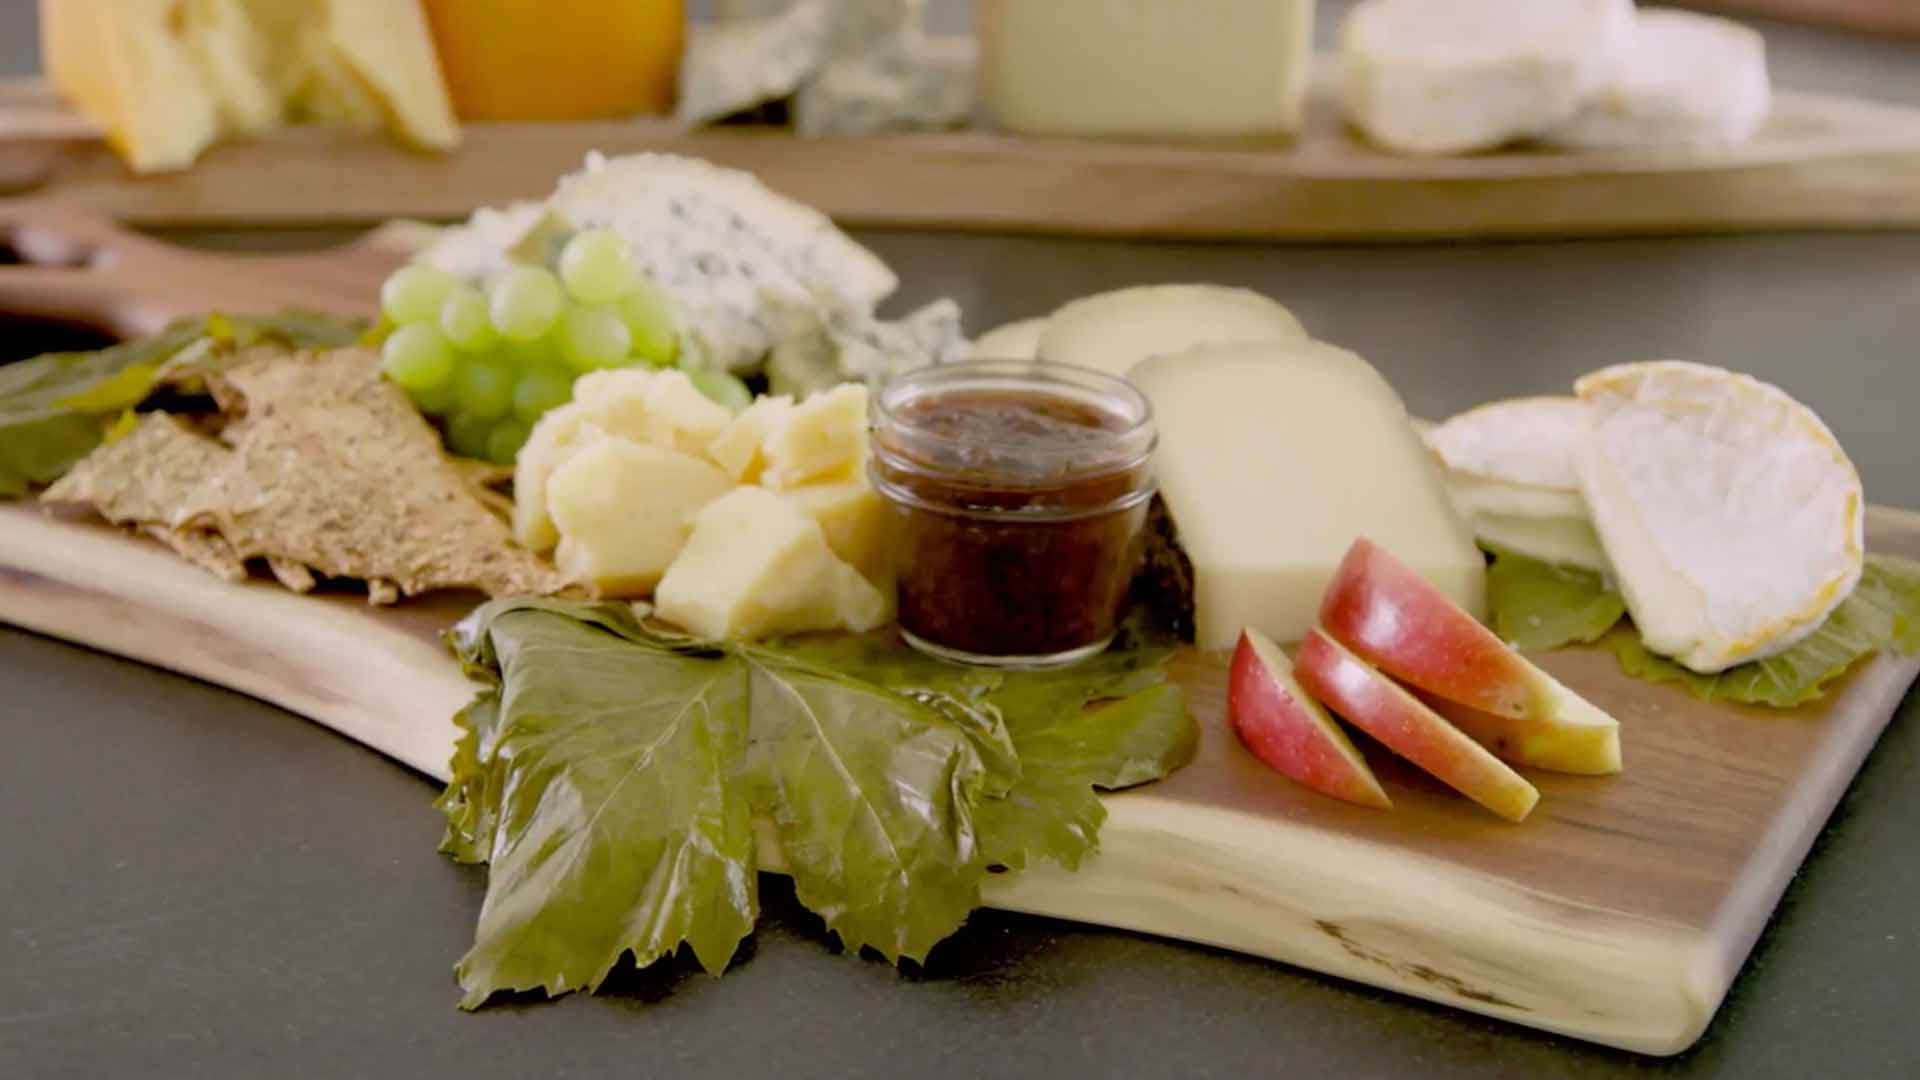 Cheese wedges next to small jar of jam, grapes apple slices on wooden serving board. 